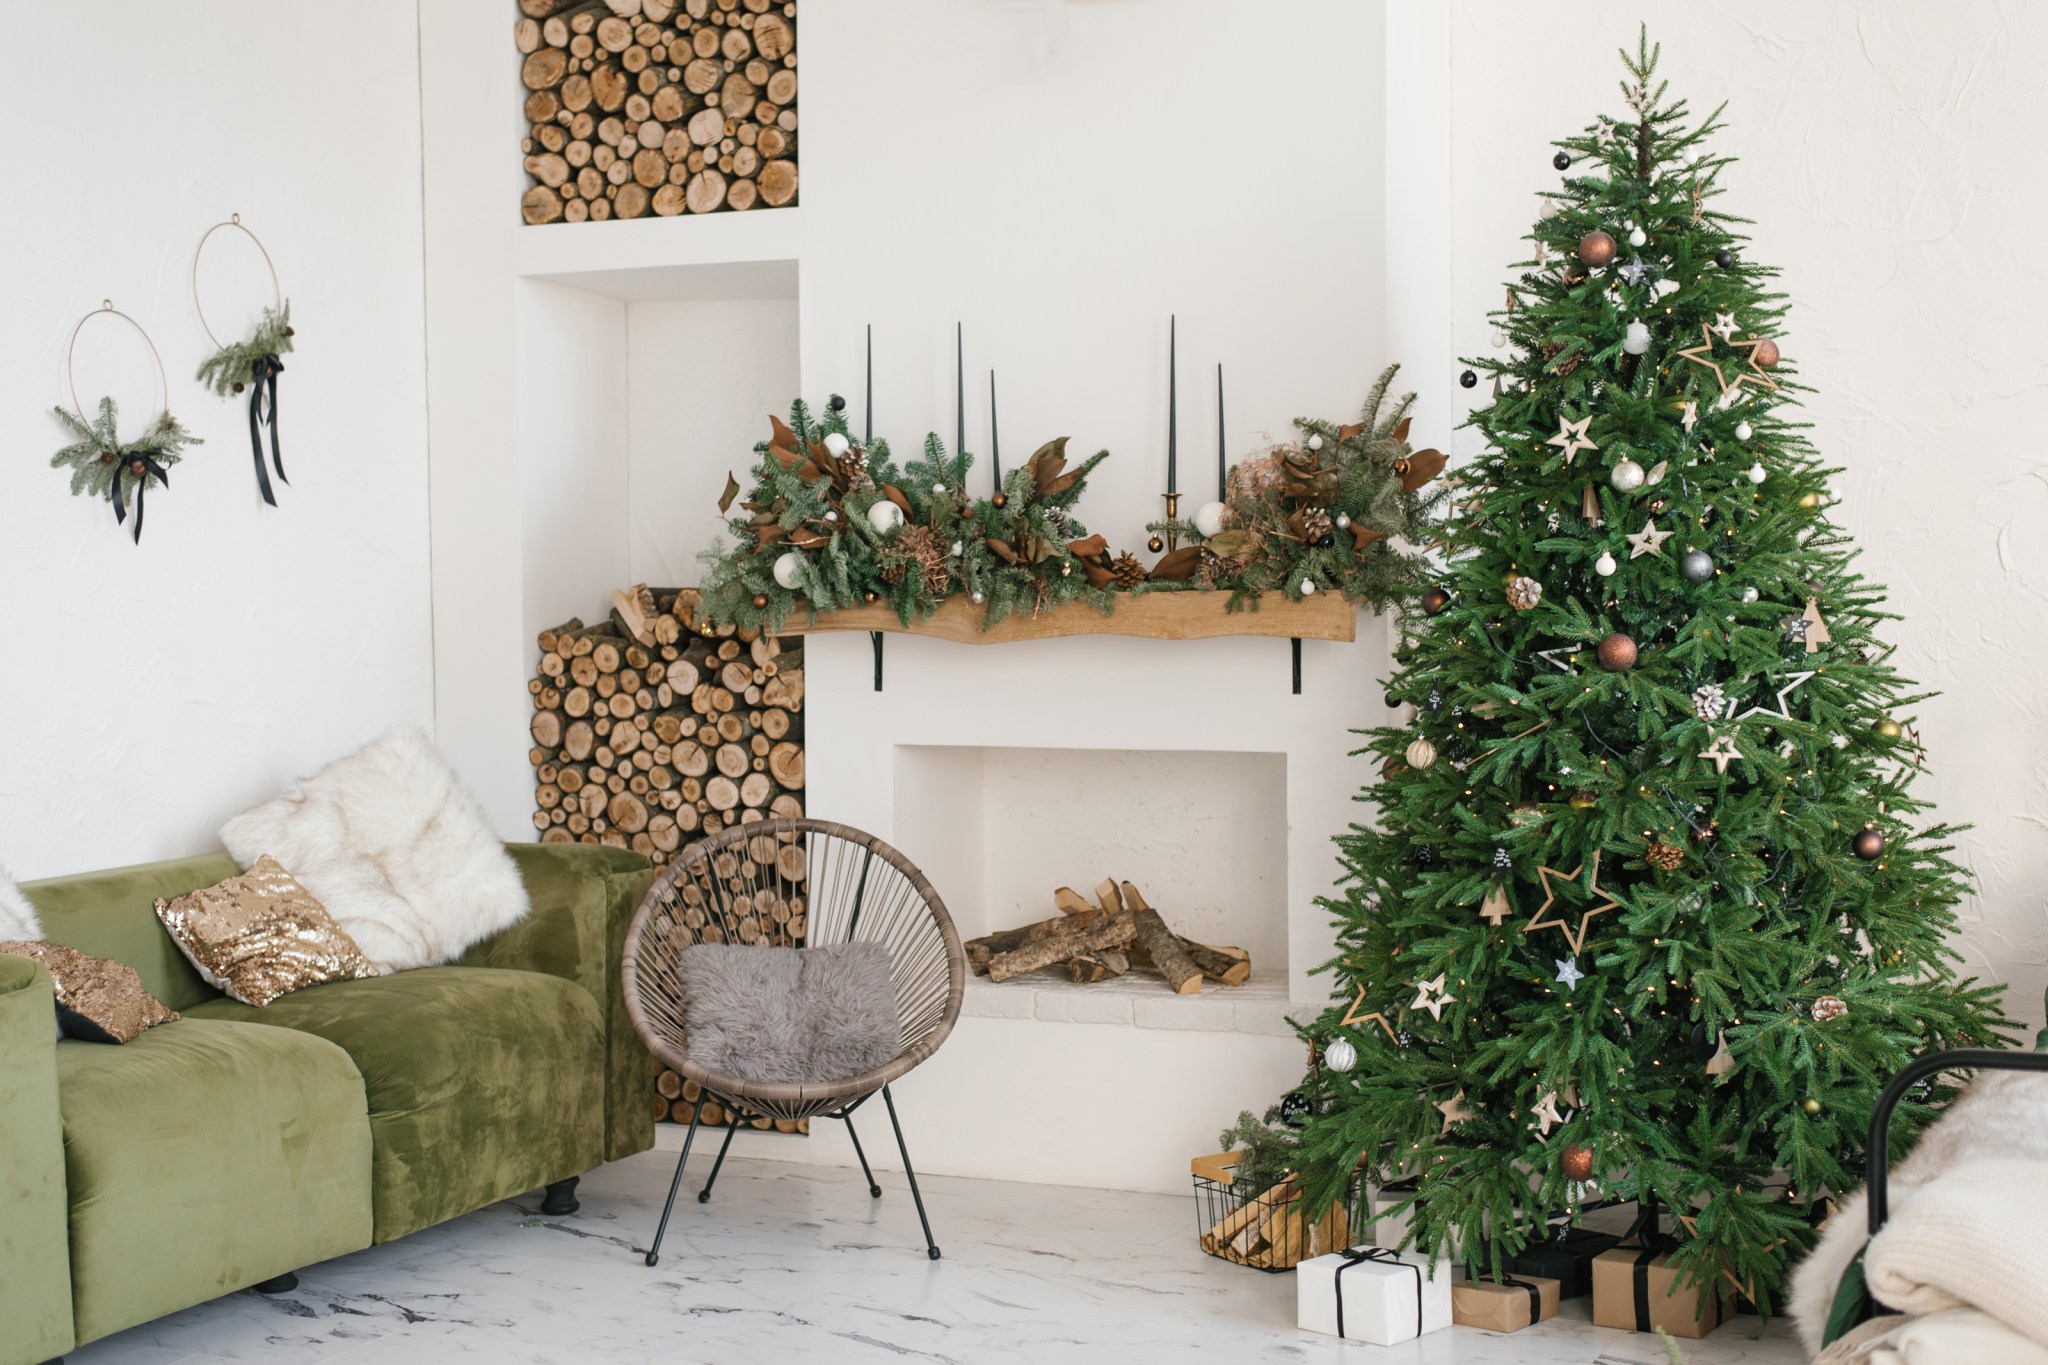 Rustic living room with a Christmas wreath, fireplace, firewood, sofa and Christmas tree, an example of Scandinavian decor.